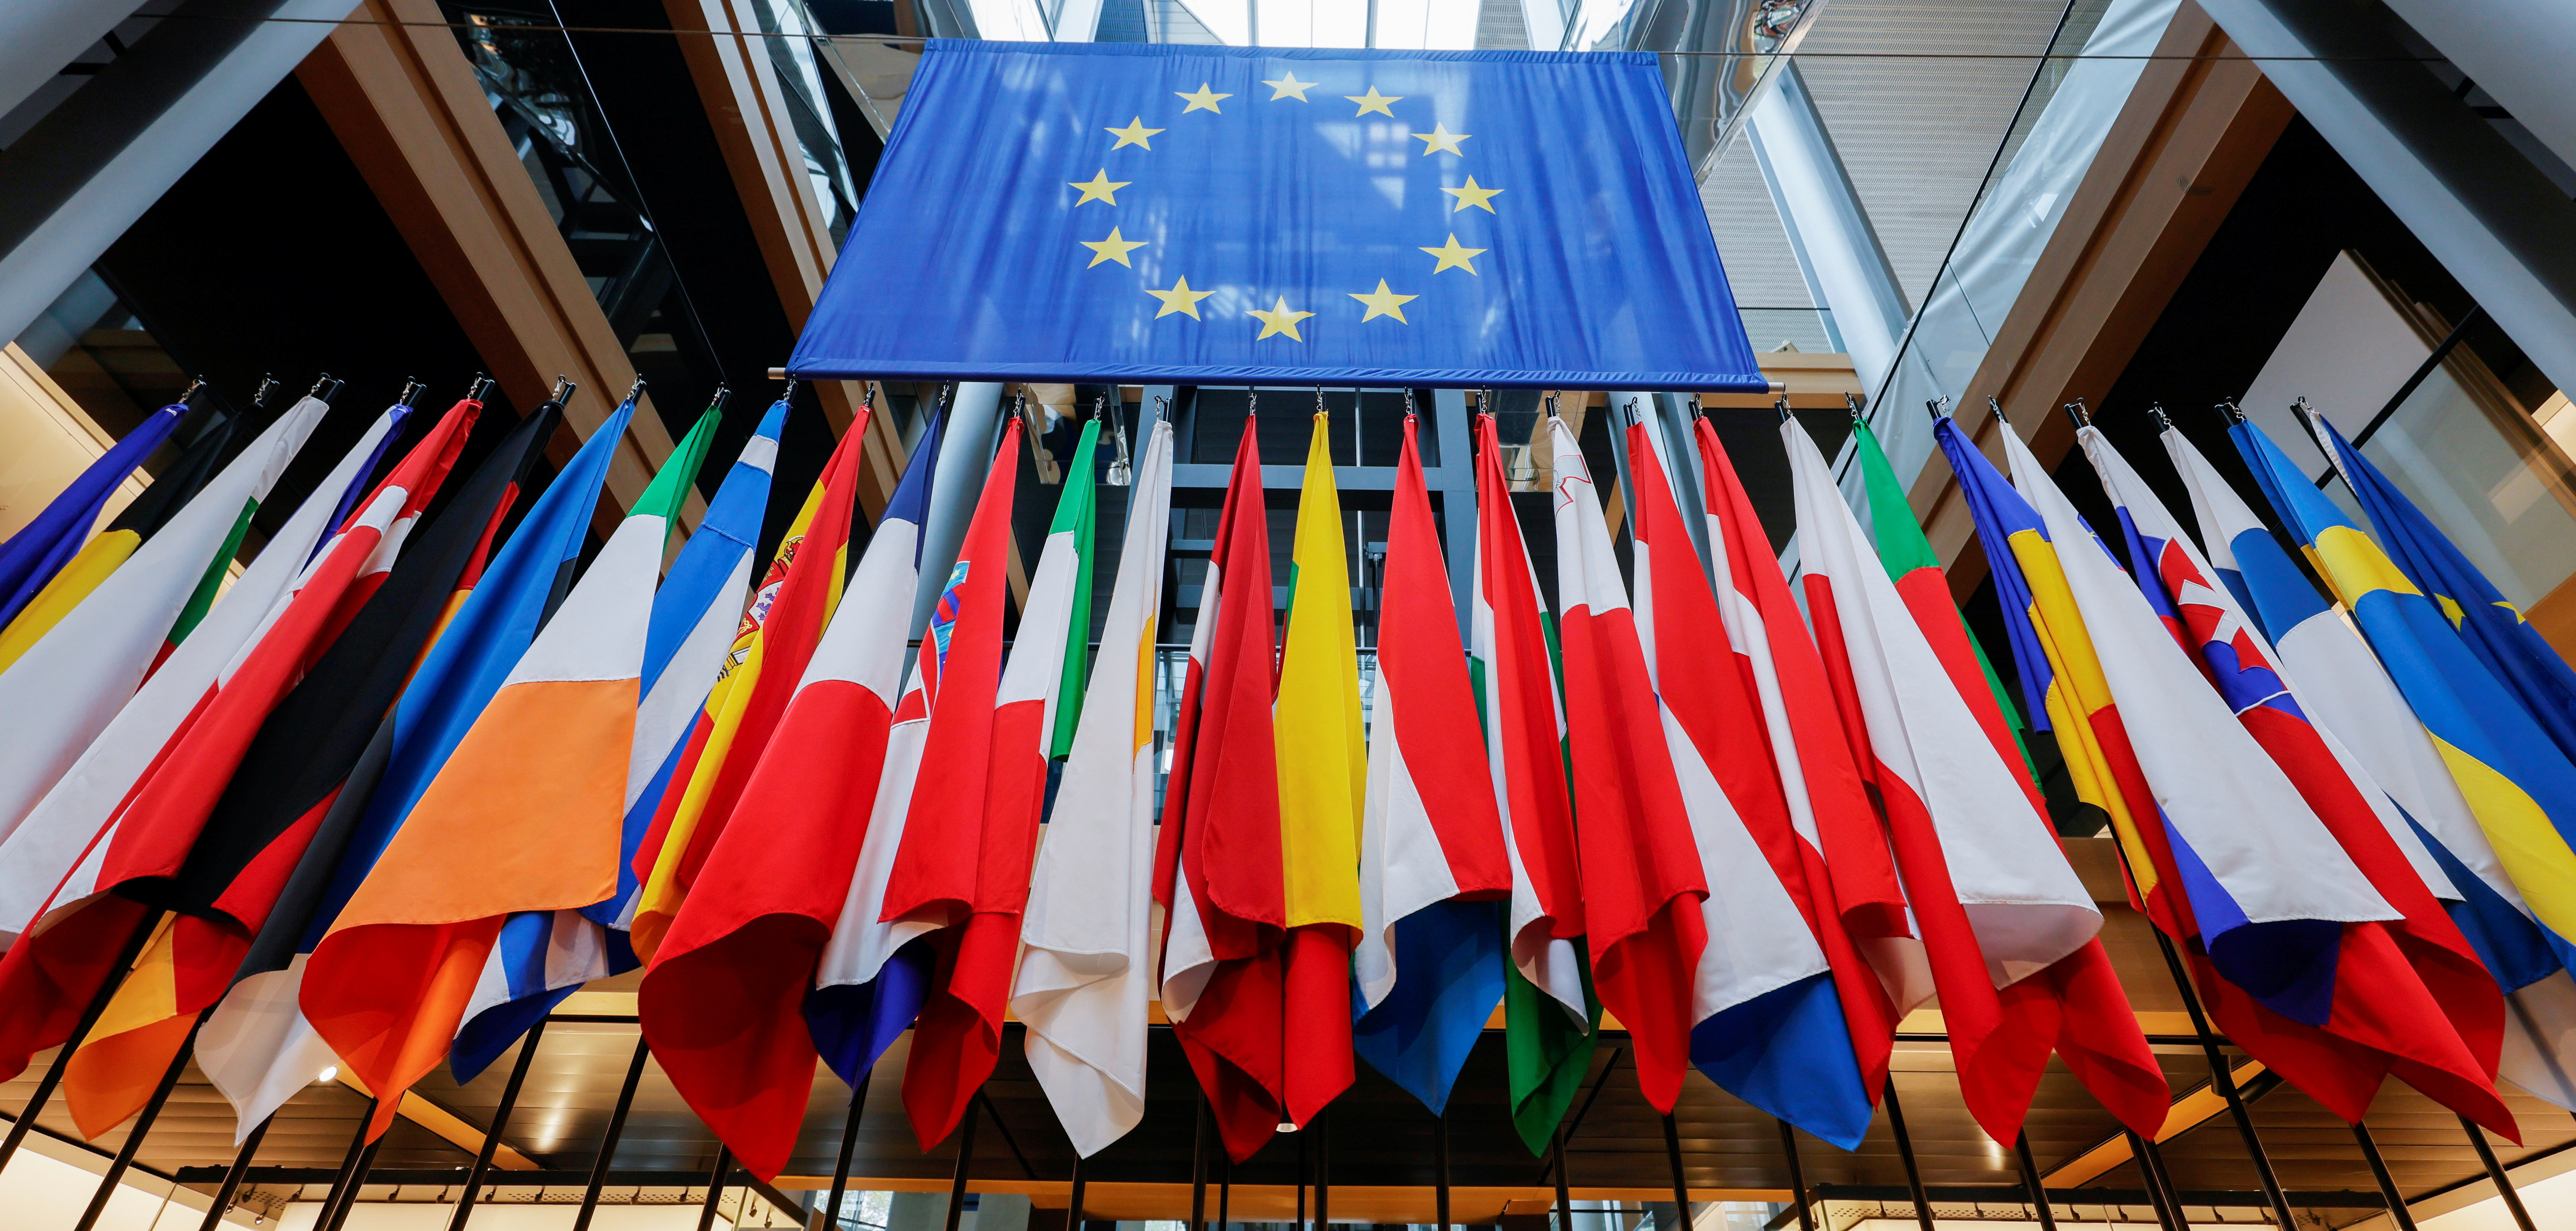 A view of different flags of the European Union Members during a debate on Poland's challenge to the supremacy of EU laws at the European Parliament, in Strasbourg, France, October 19, 2021. Ronald Wittek/Pool via REUTERS